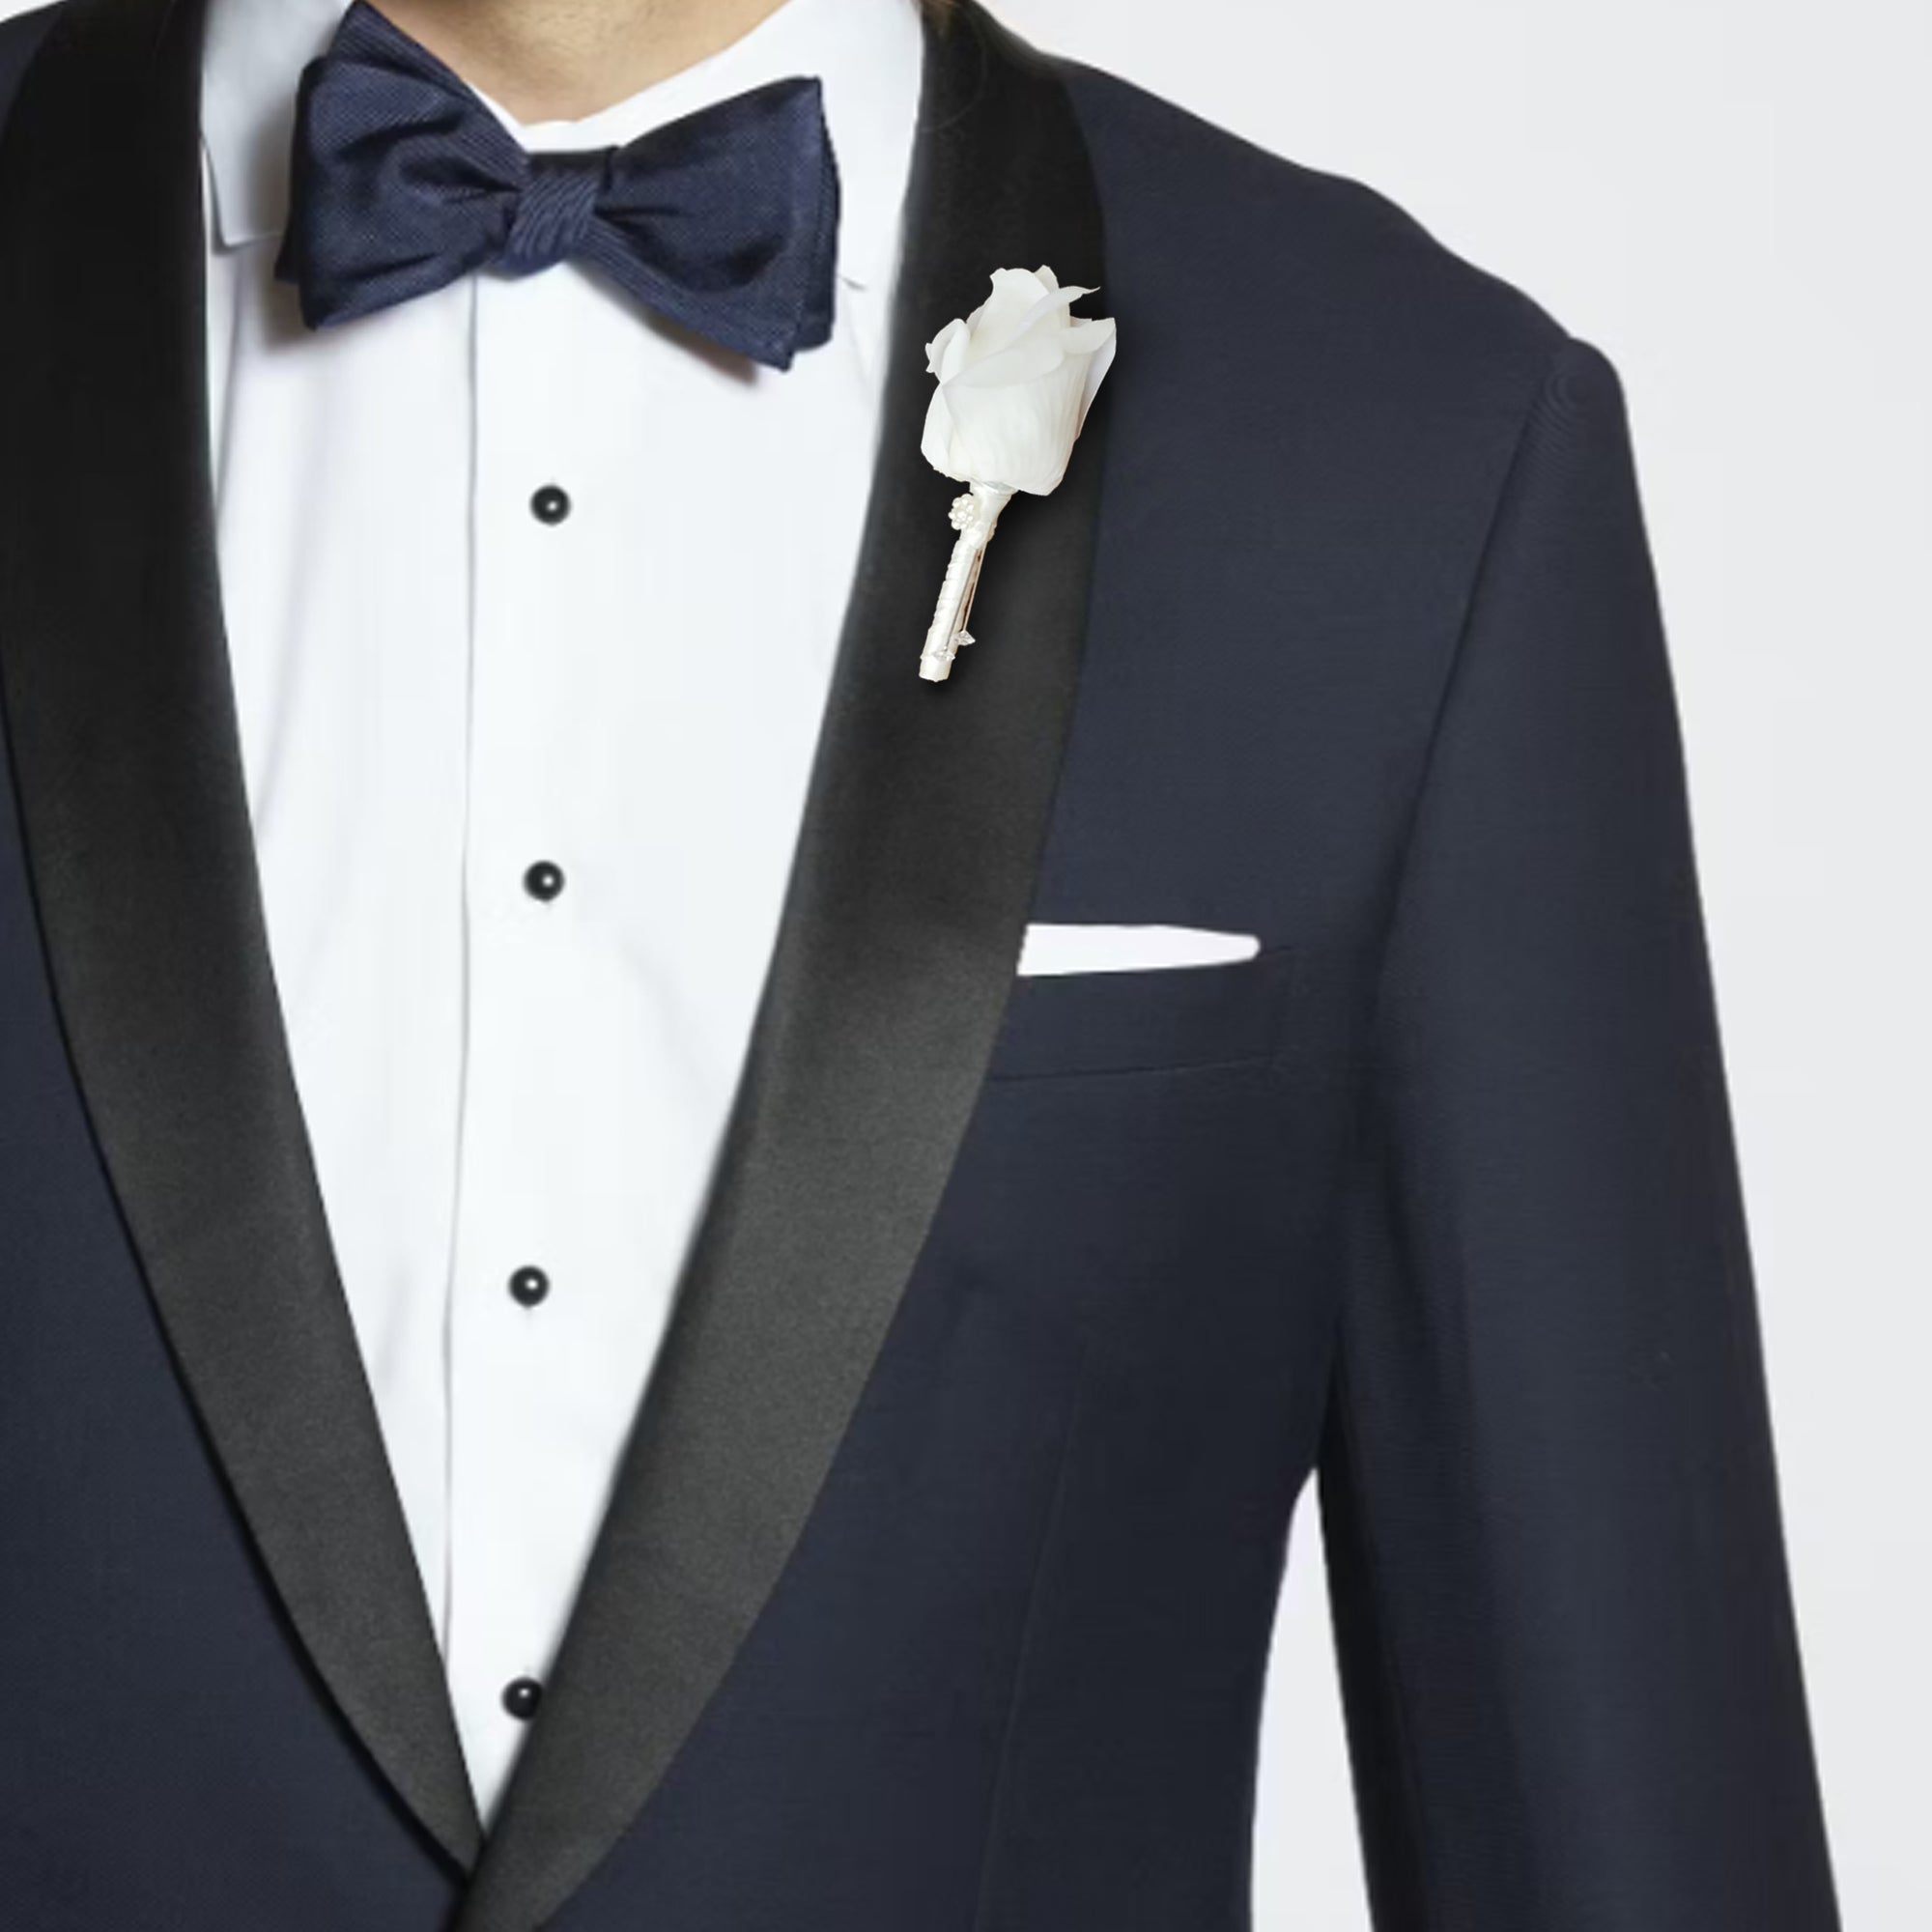 White Rose Bud Boutonniere for Groom